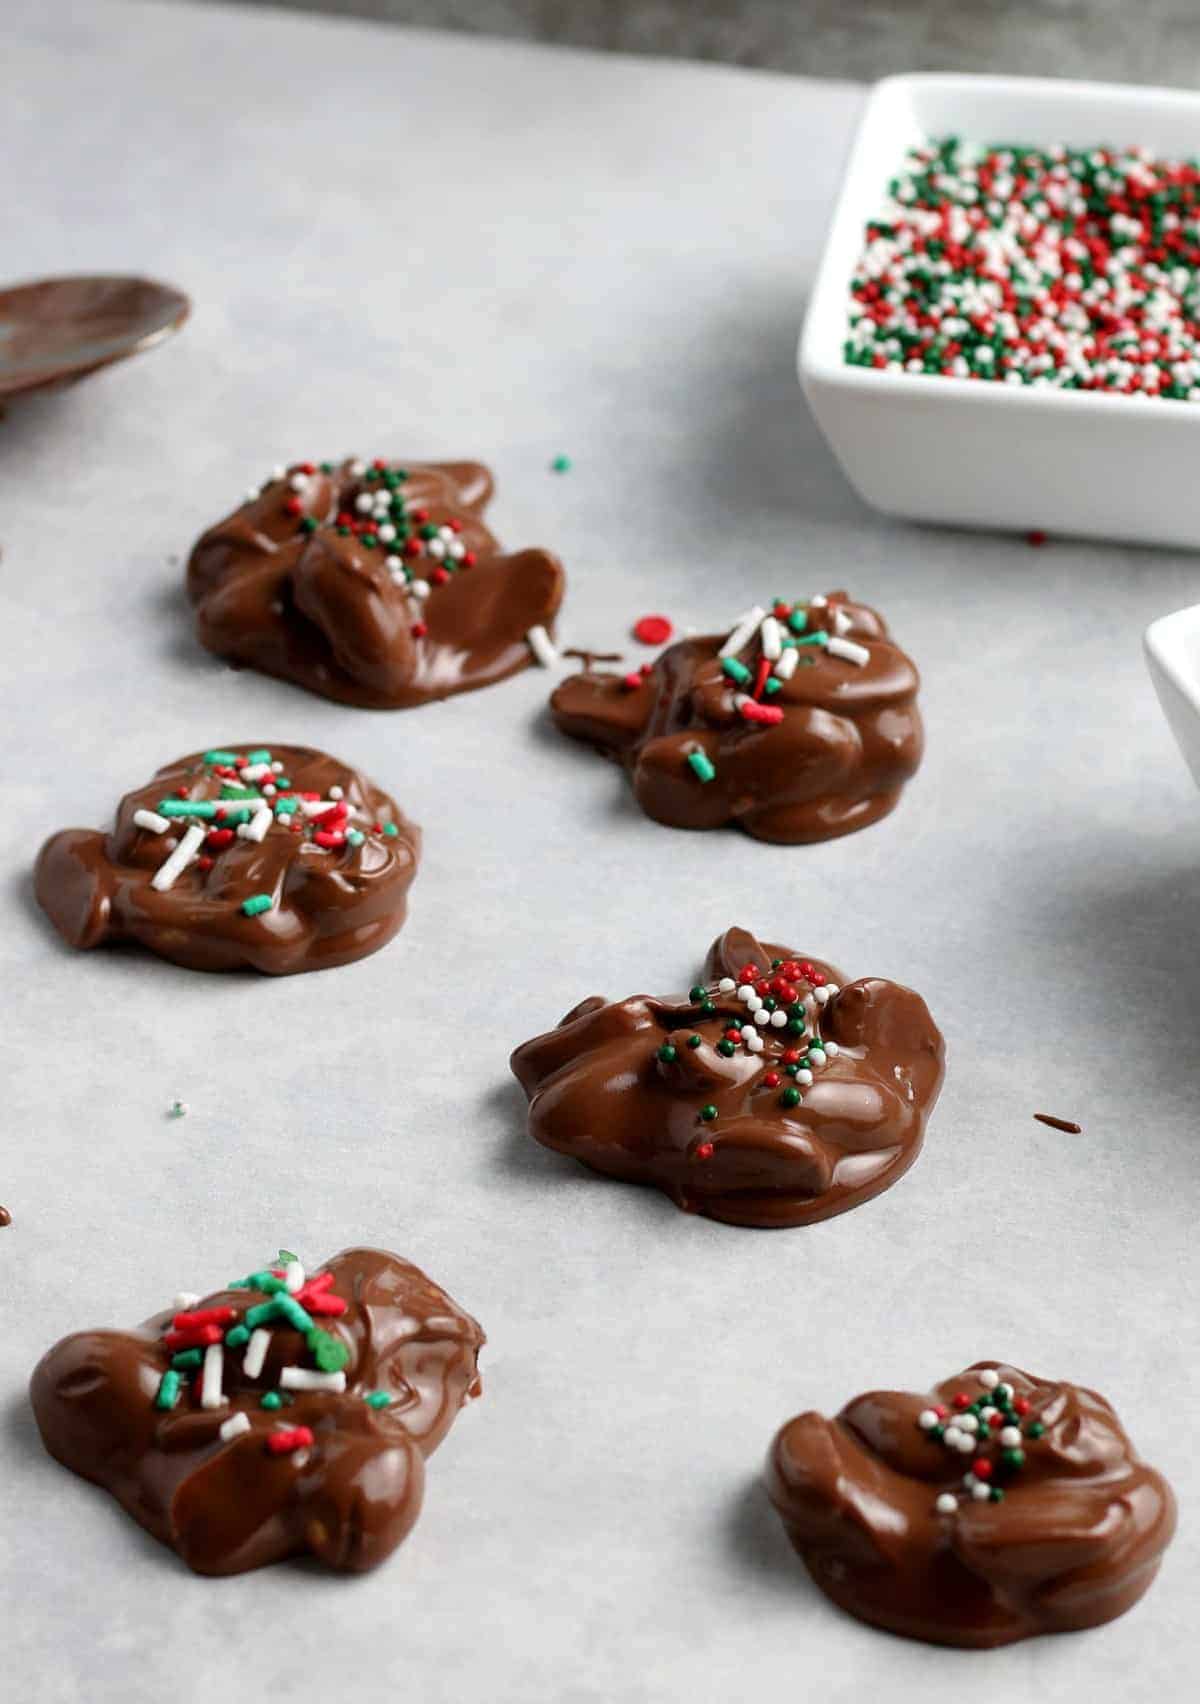 Dollops of chocolate candies are spread out on parchment paper.